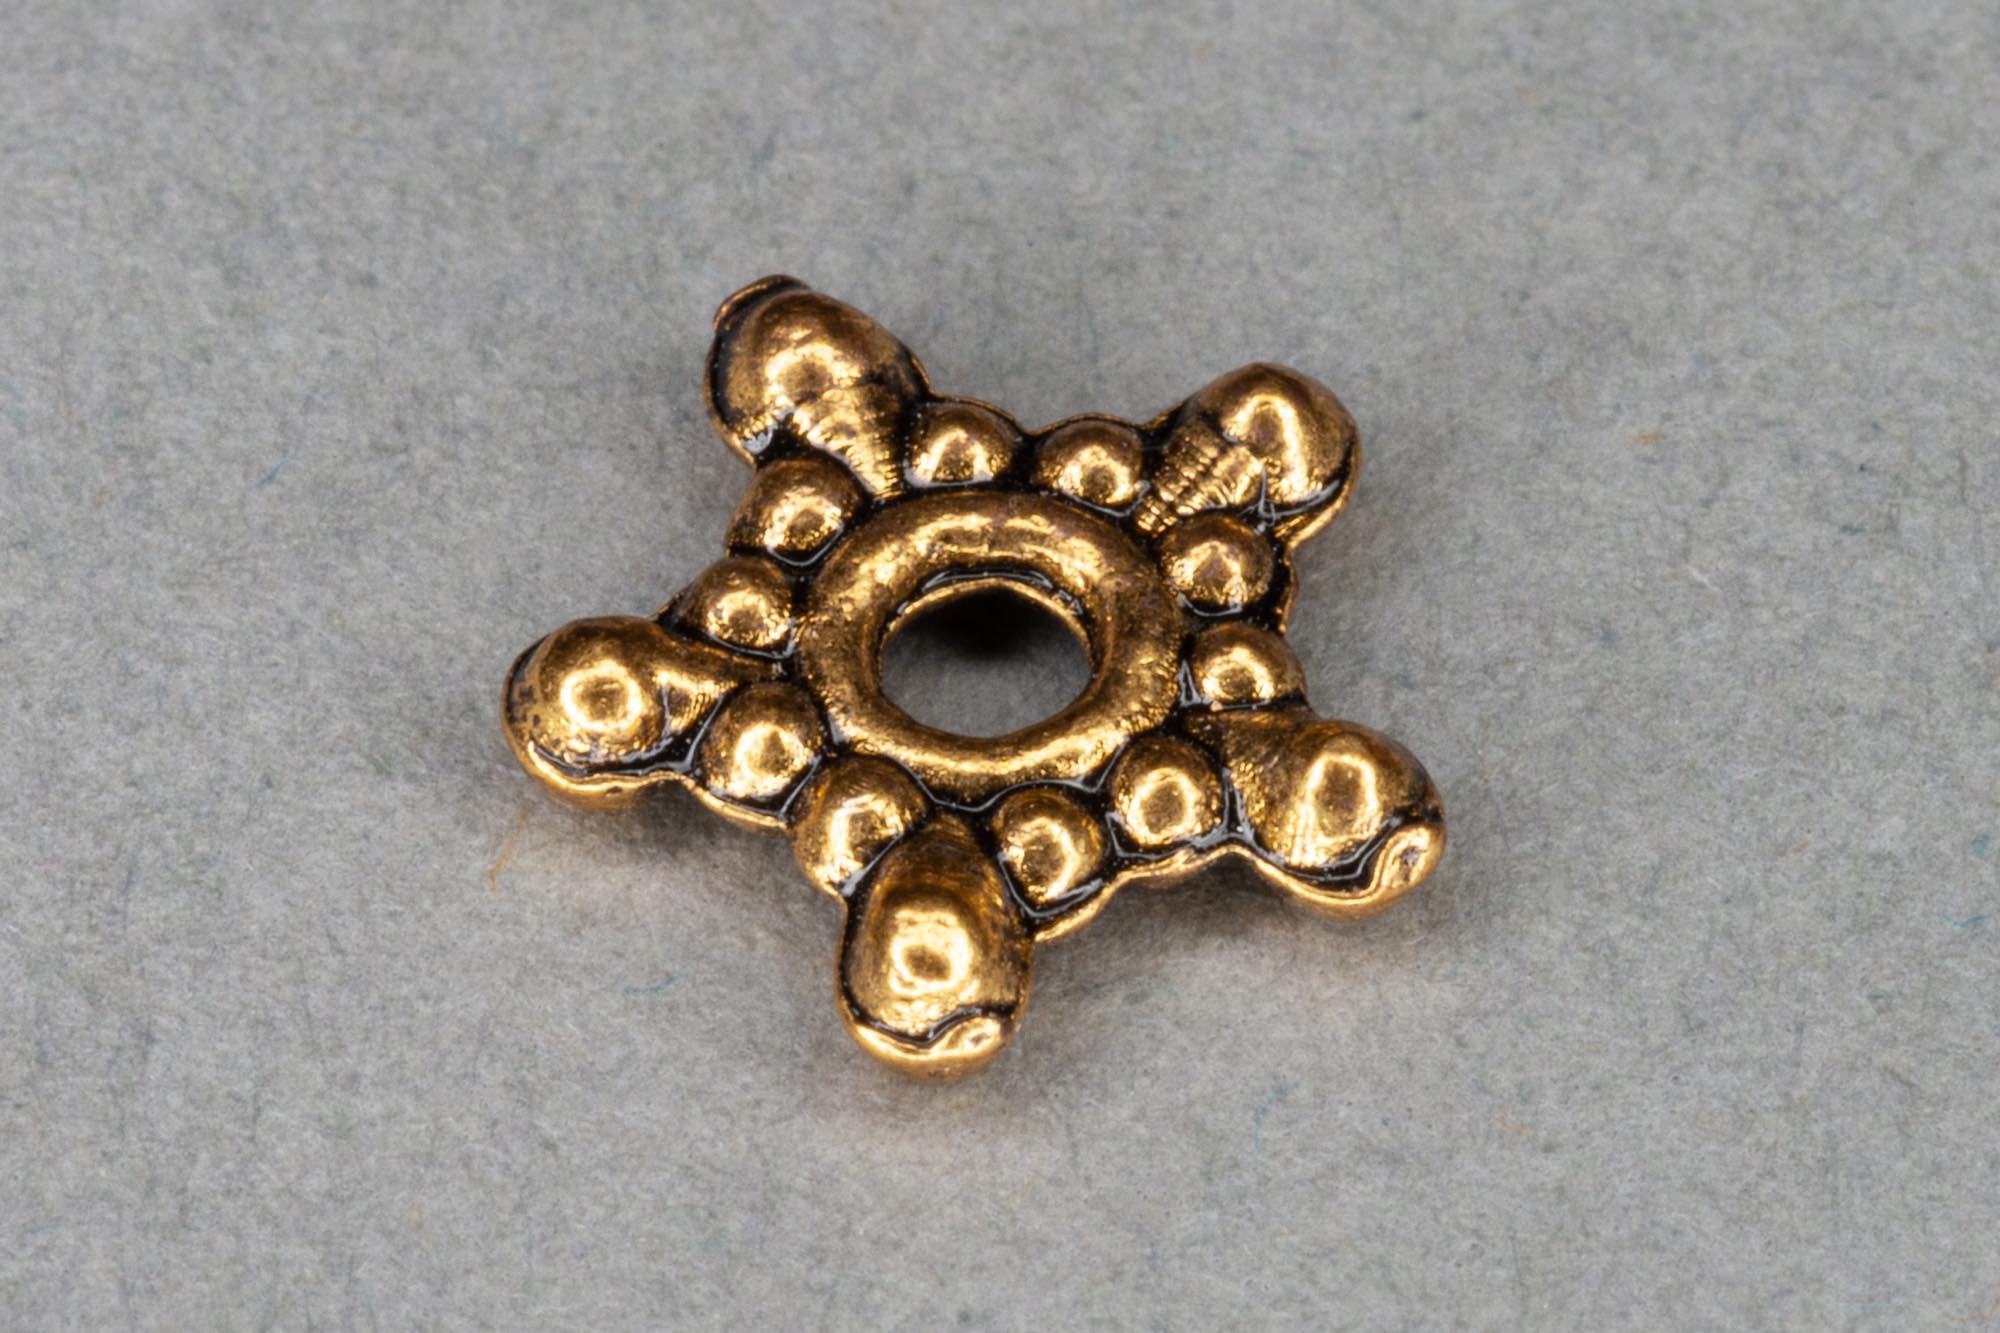 Antique Gold Plated Flat Star Spacer Bead 9×1.5mm, 2mm hole